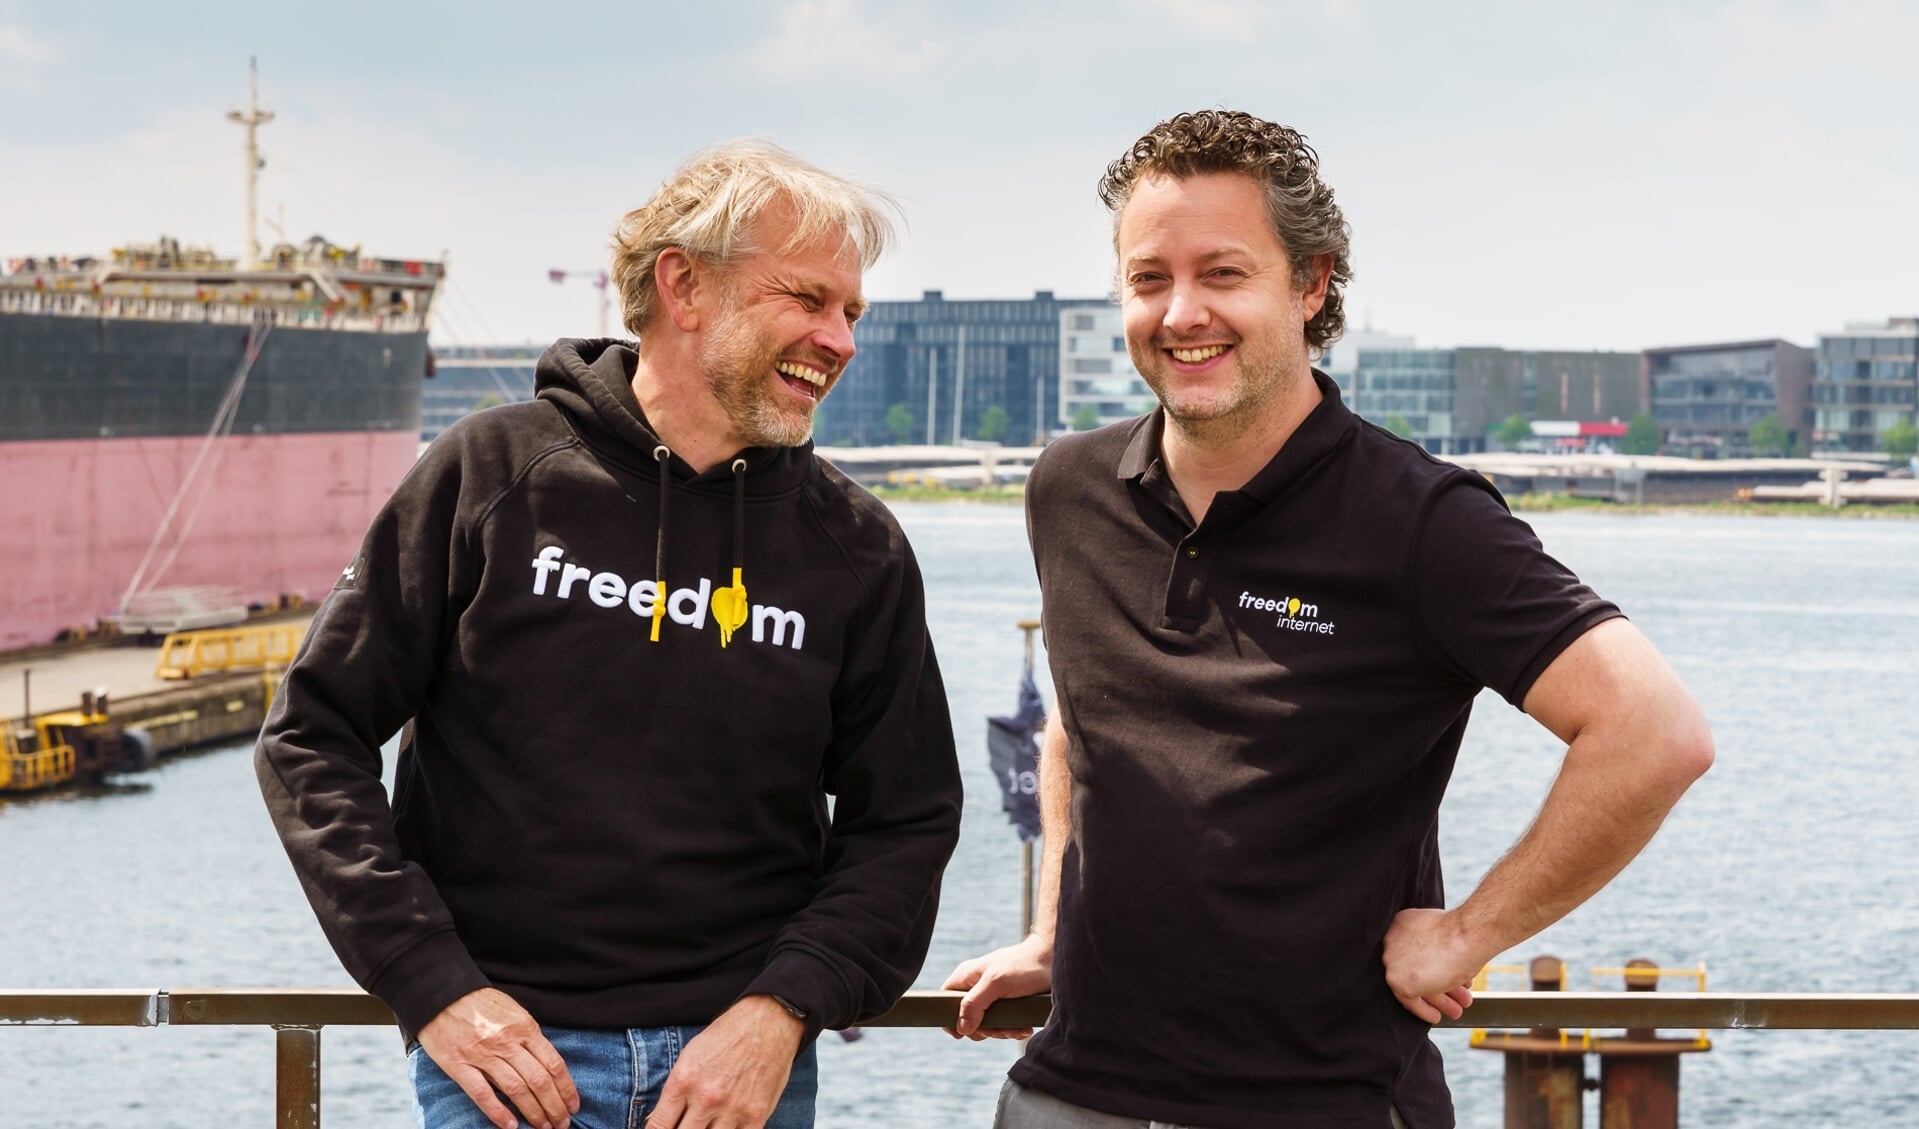 Anco Scholte ter Horst (CEO Freedom) en Twan (Manager Commercie Freedom)